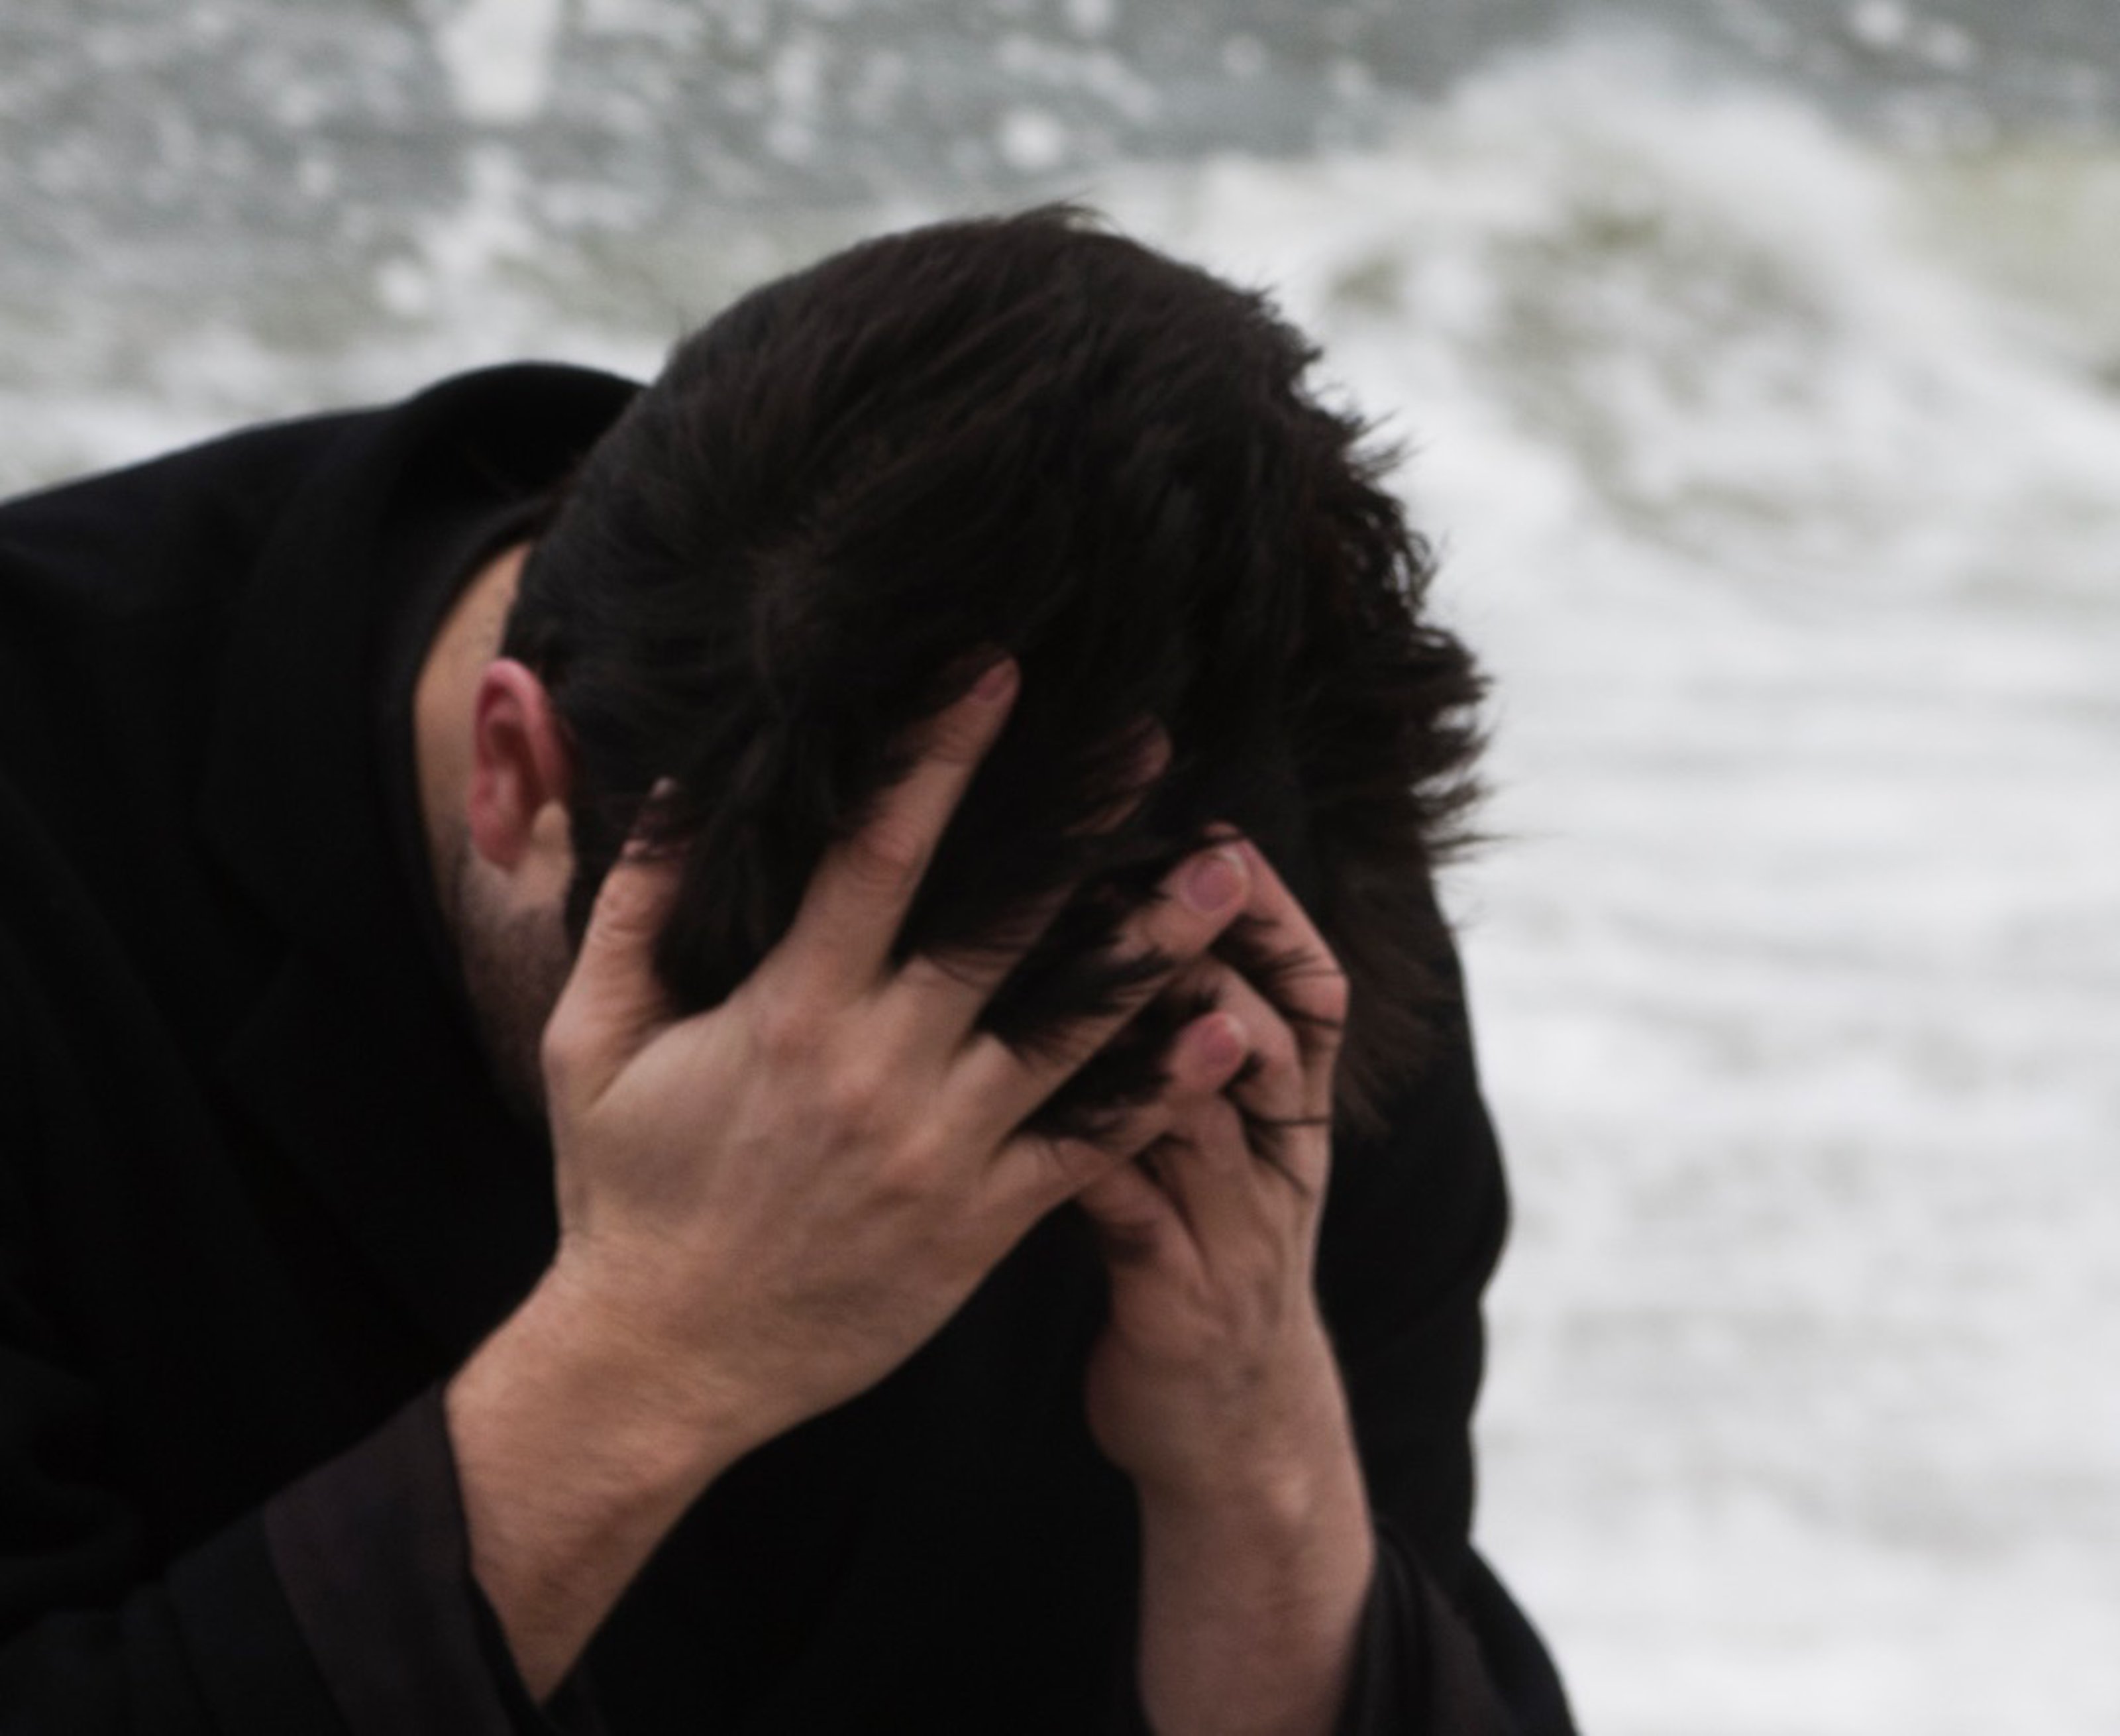 David Horvitz with a black sweater and his head in his hands standing in front of waves crashing.